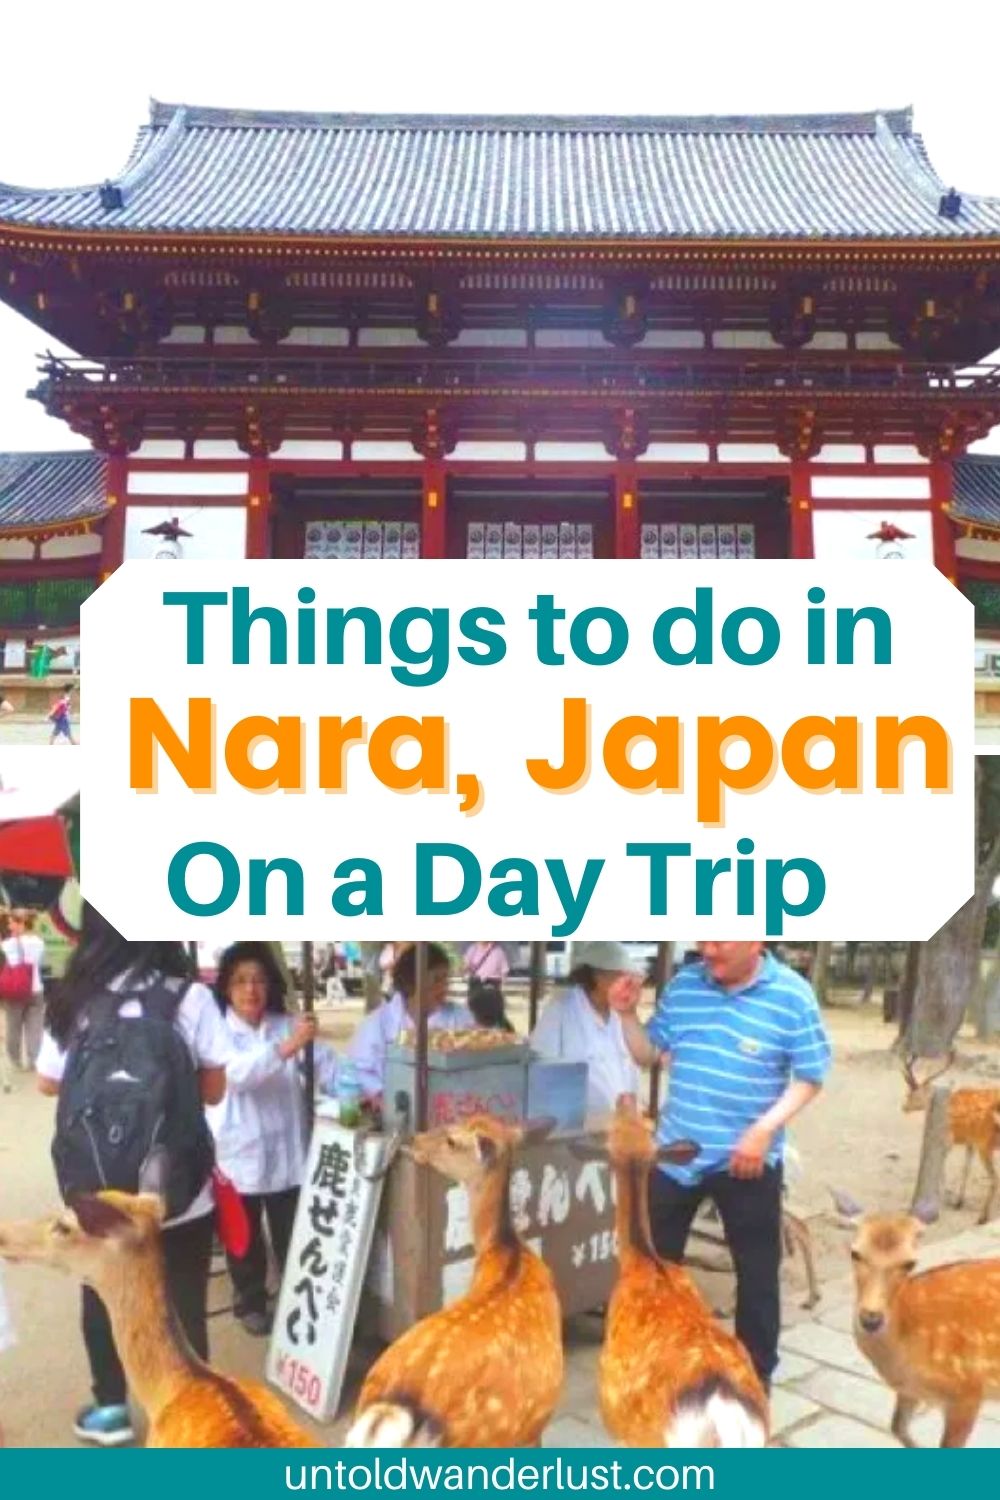 Cool Things to do in Nara, Japan on a Day Trip